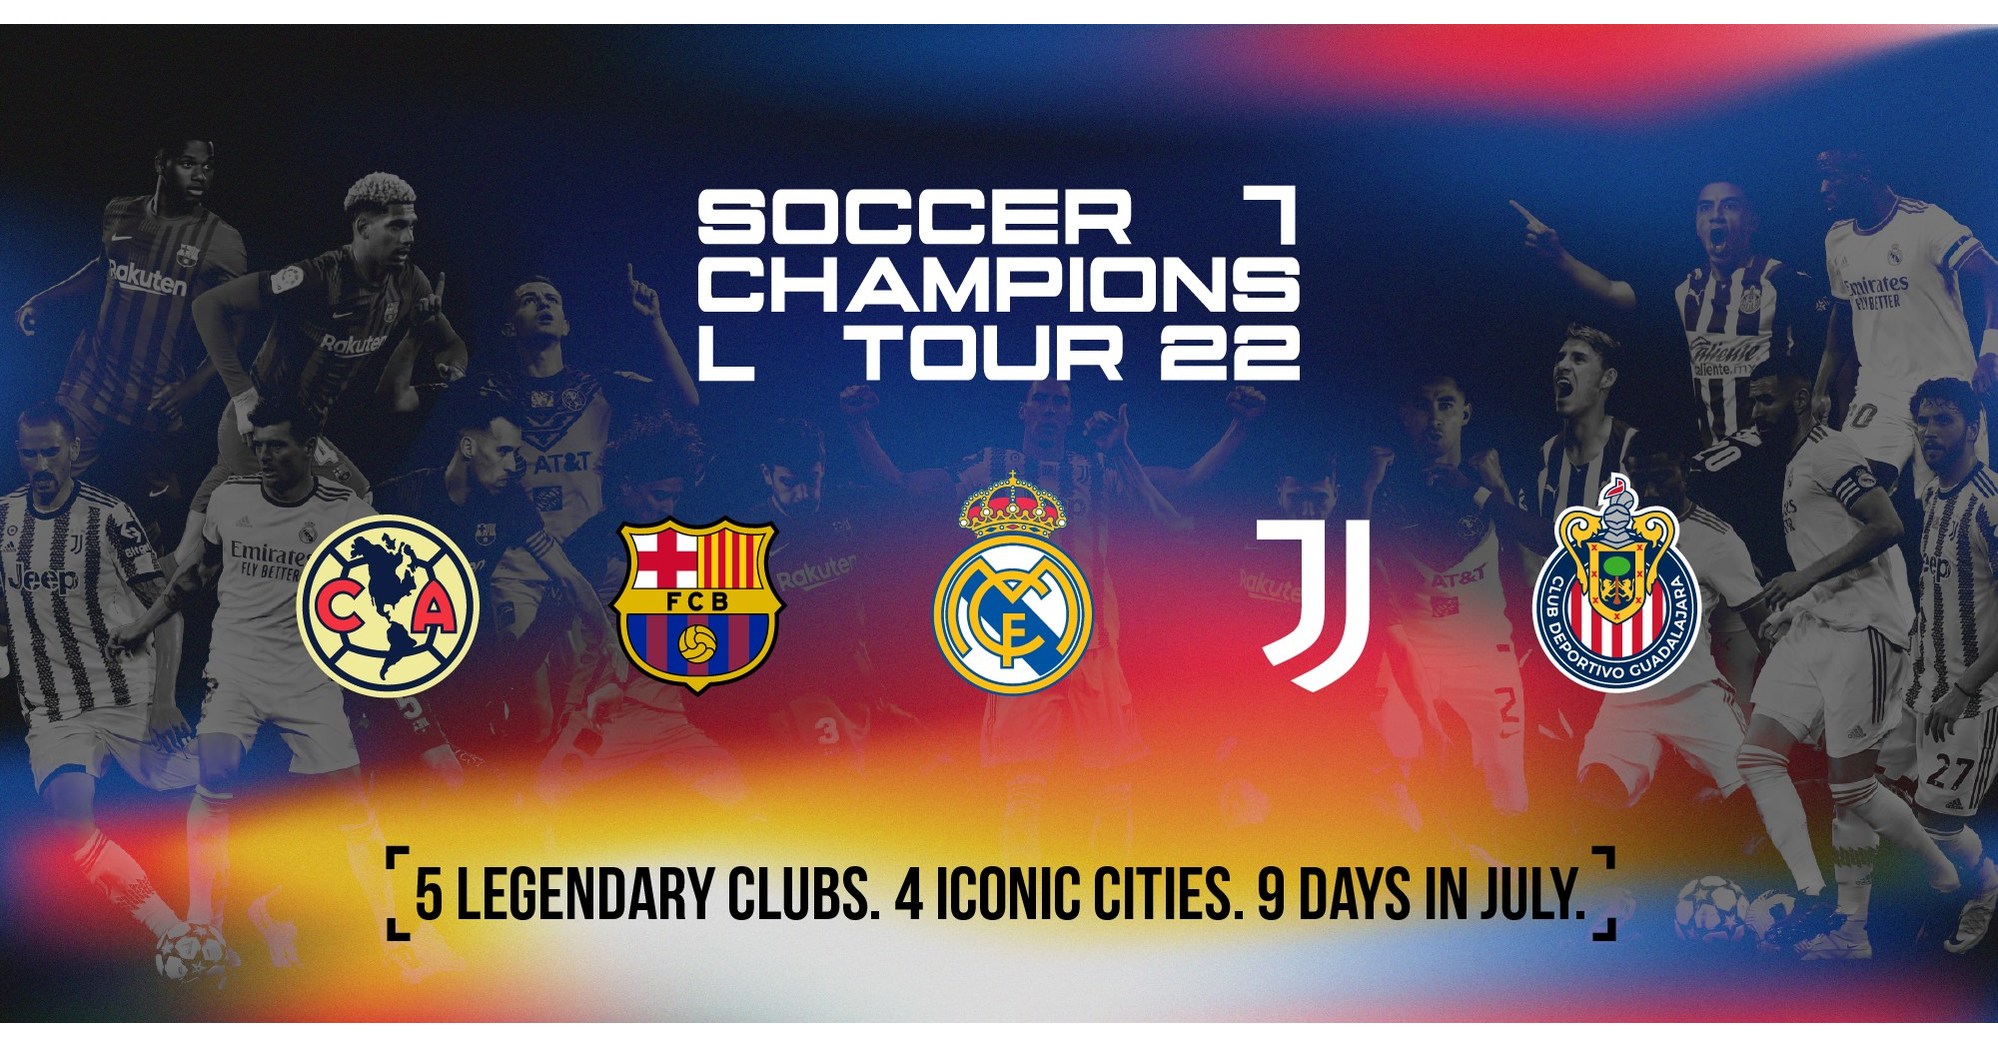 Real Madrid set to play Barcelona in Las Vegas as part of the inaugural 'Soccer Champions Tour' this summer